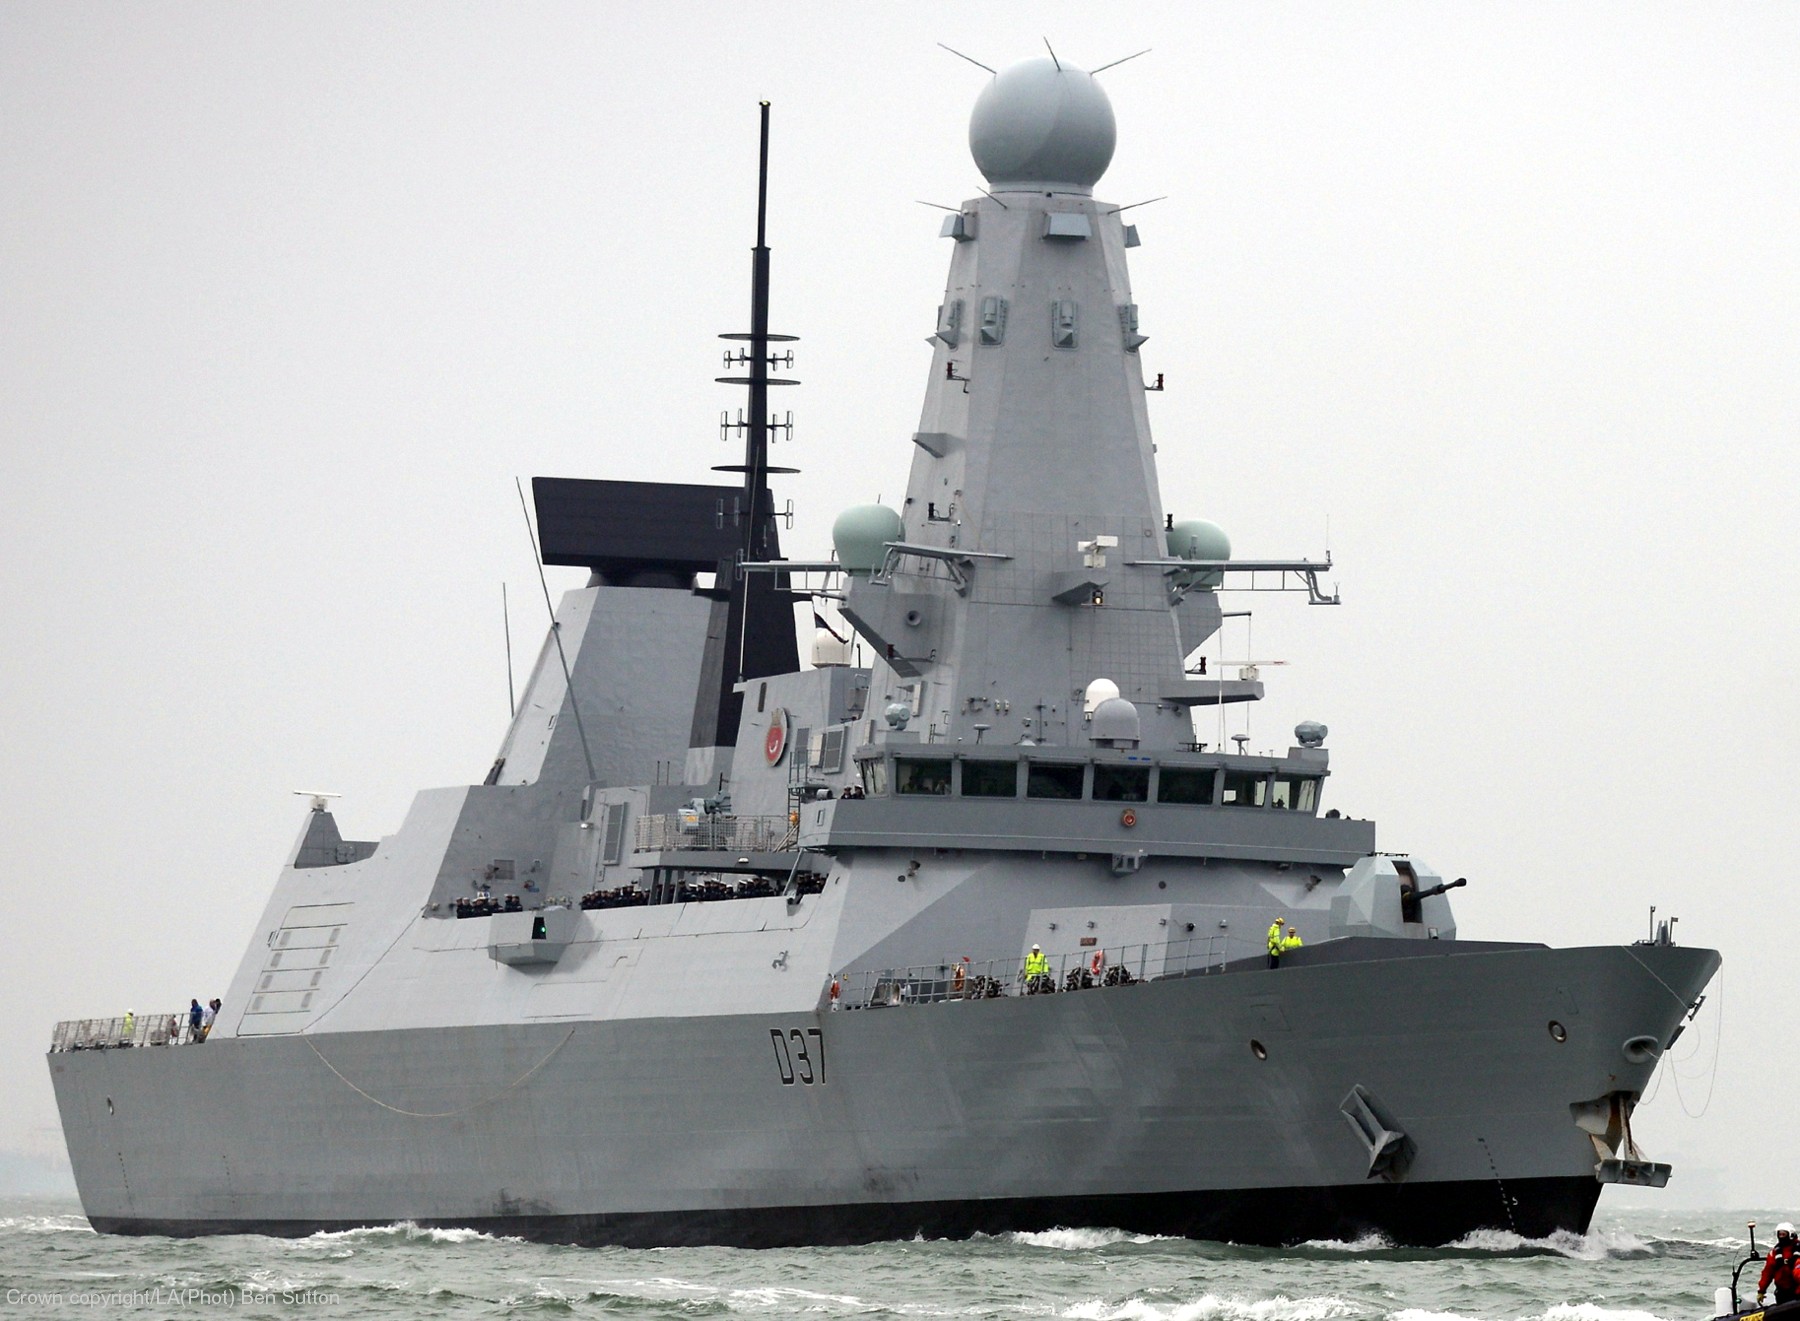 d37 hms duncan d-37 type 45 daring class guided missile destroyer ddg royal navy sea viper 08